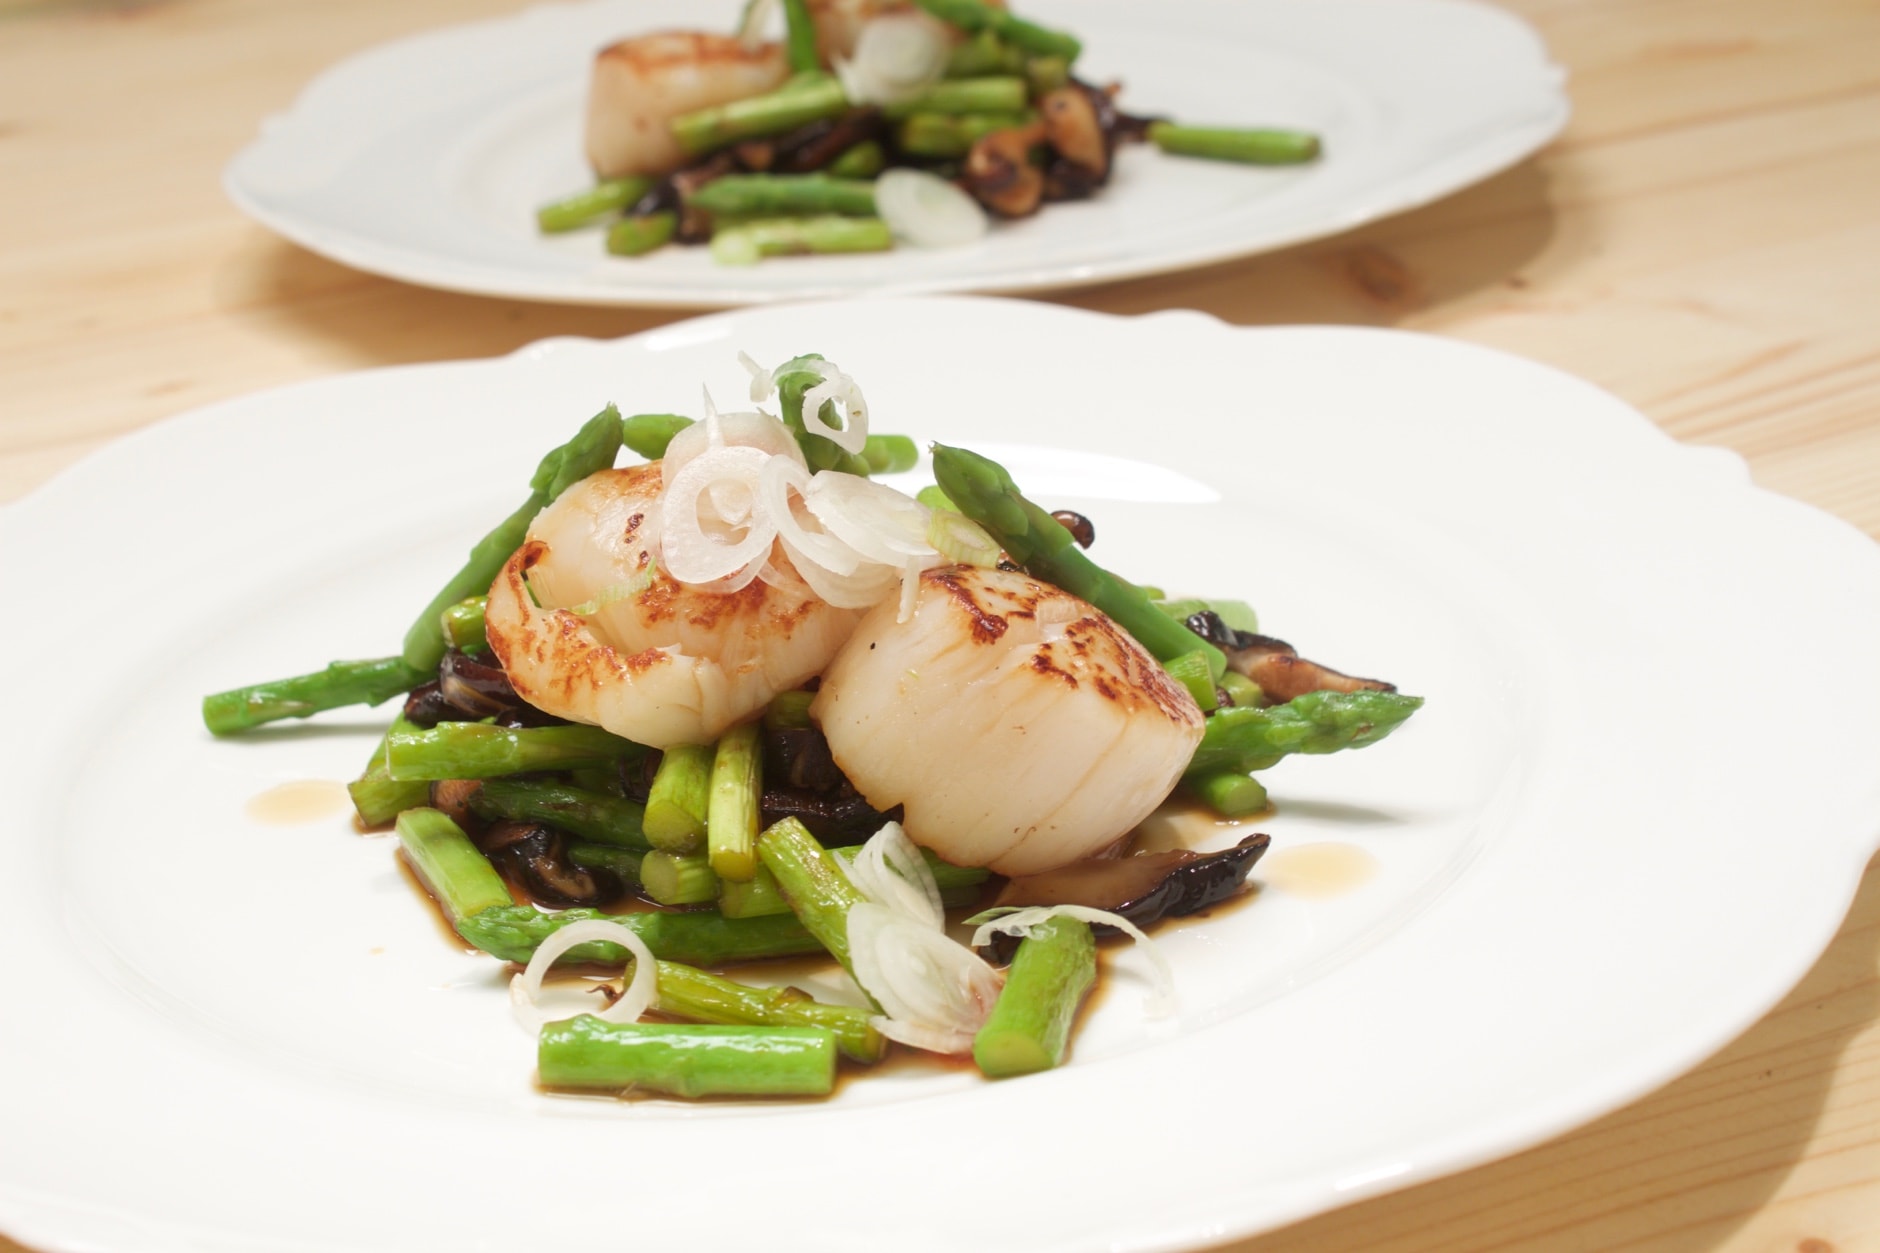 Scallops starter with asparagus